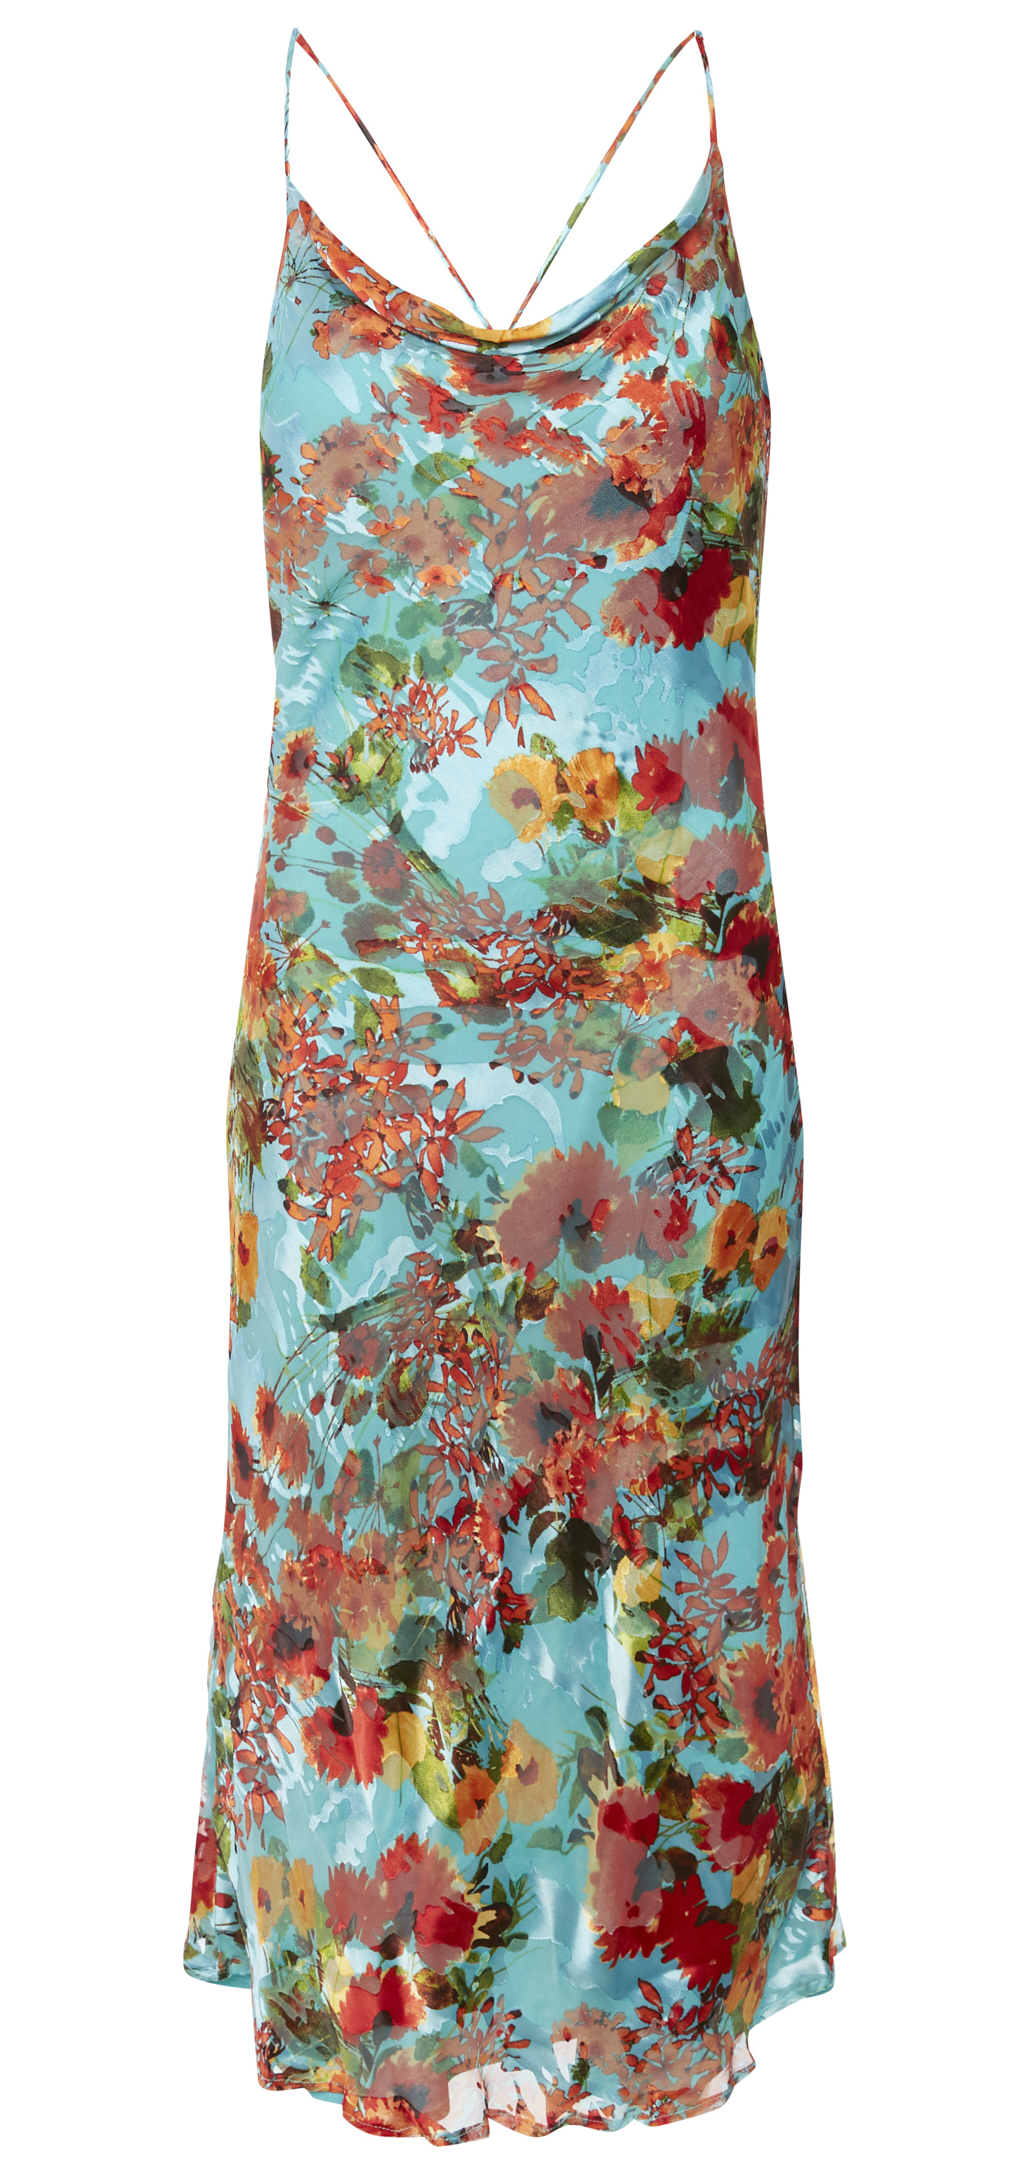 Willow & Clay Printed Slip Dress